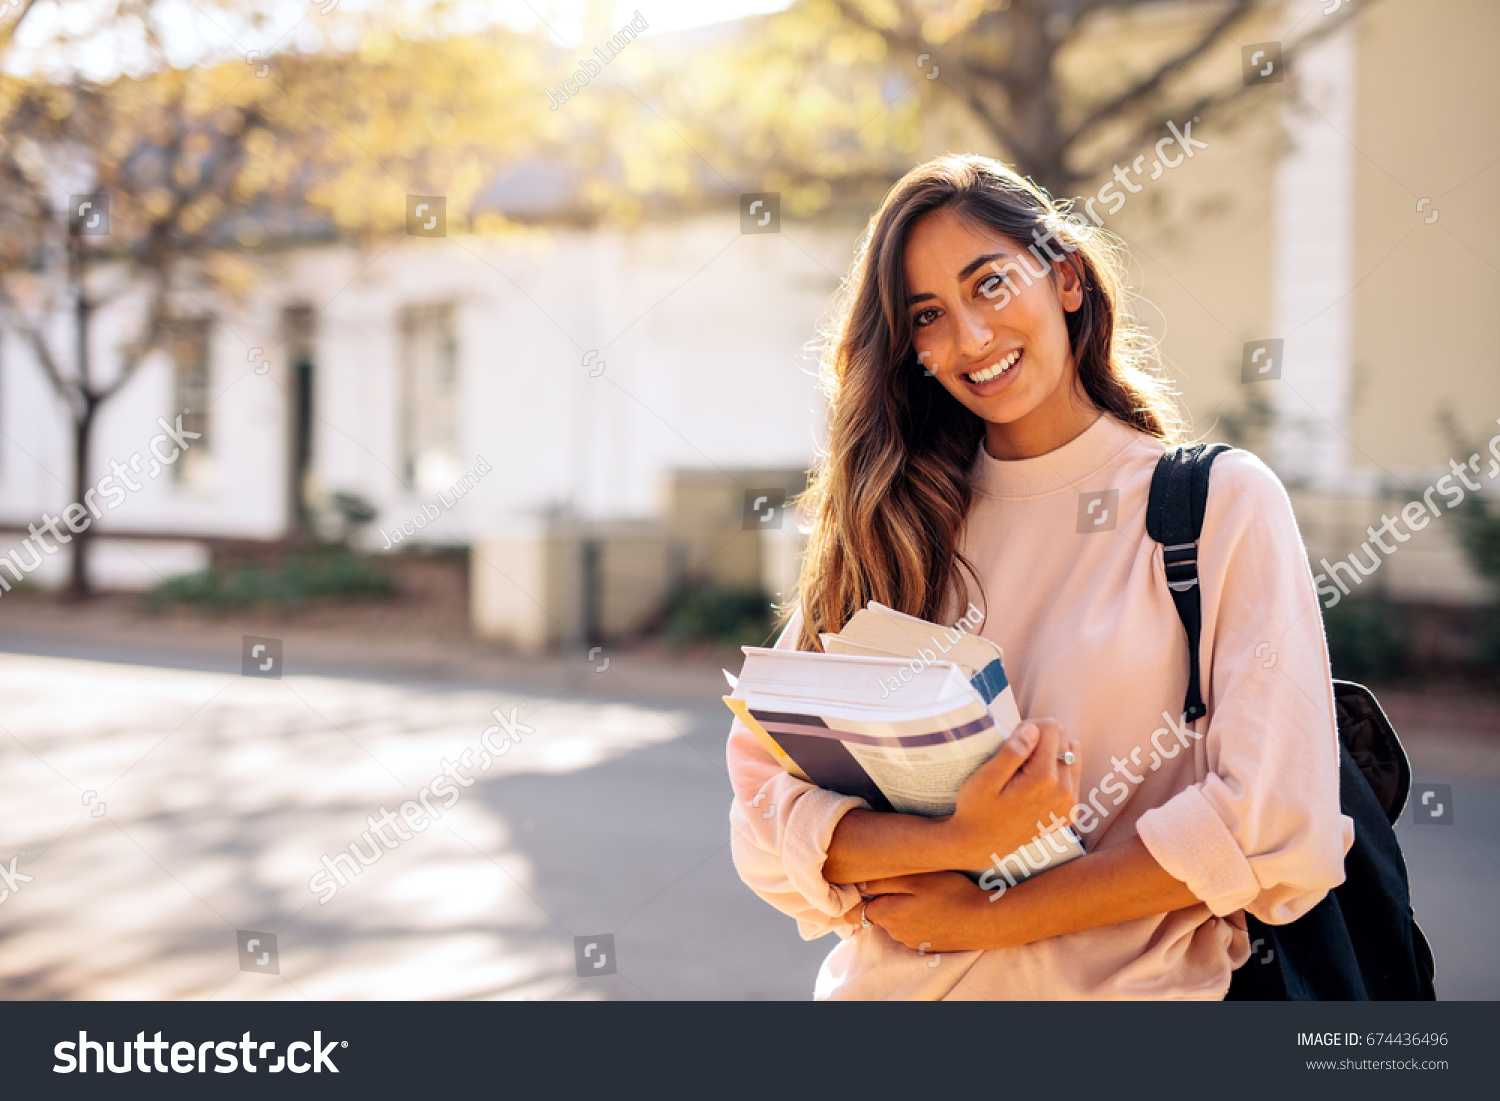 Beautiful young woman with backpack and books outdoors. College student carrying lots of books in college campus. #674436496